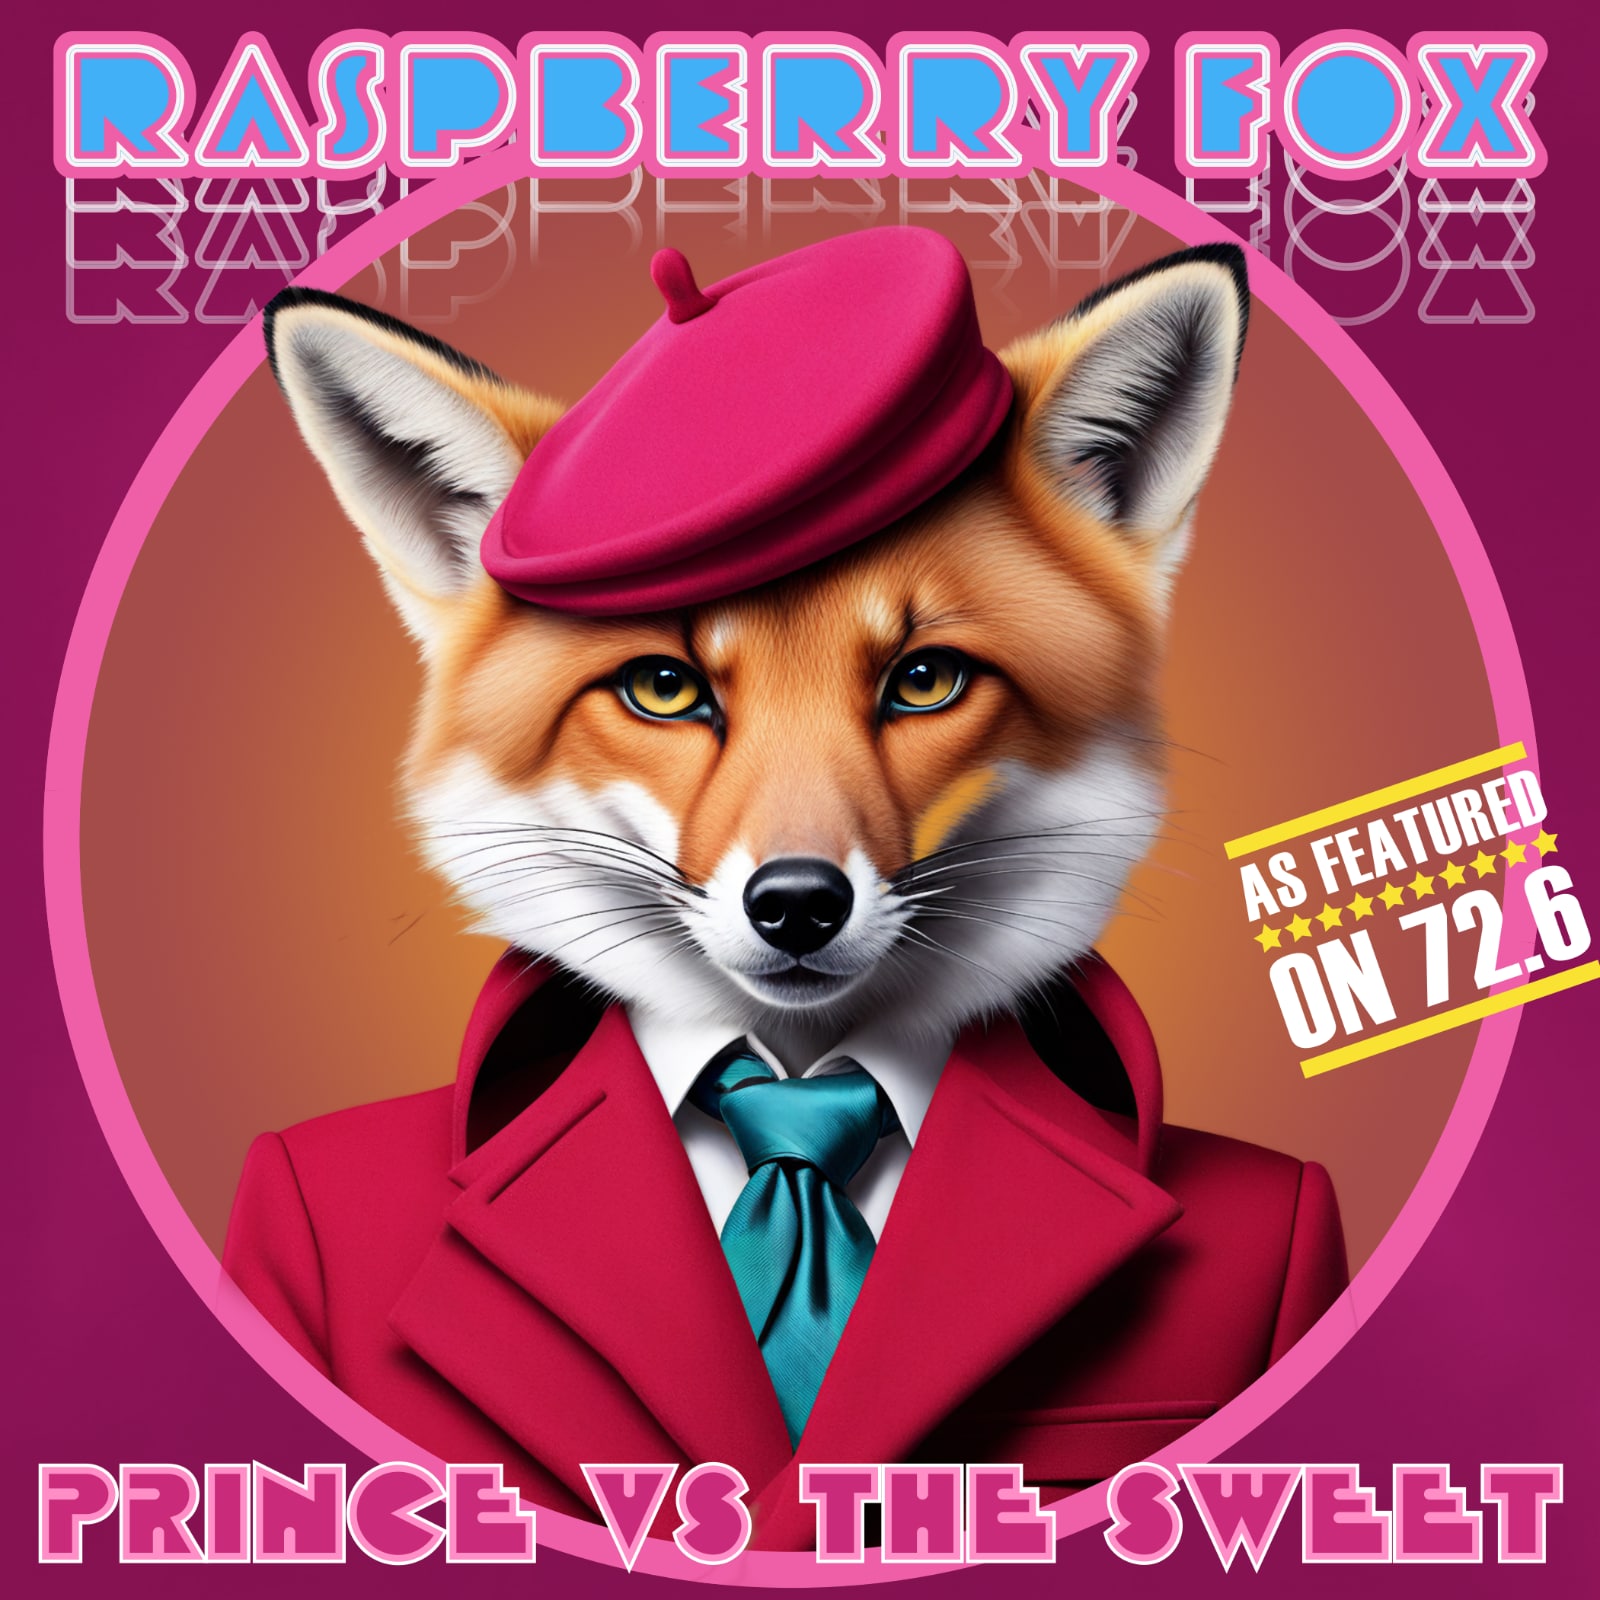 raspberry - Radio Clash Podcast 72.6 and Raspberry Foxes Radio Clash Music Mashup Podcast brings you the best in eclectic tunes, mashups and remixes from around the world. Since 2004, we've been bringing you the freshest and most innovative music from a diverse range of genres and cultures. Join us on our musical journey as we explore the sounds of yesterday, today, and tomorrow. Discover new music and be inspired by the mashup of musical styles that only Radio Clash can provide. Subscribe now to elevate your musical experience!